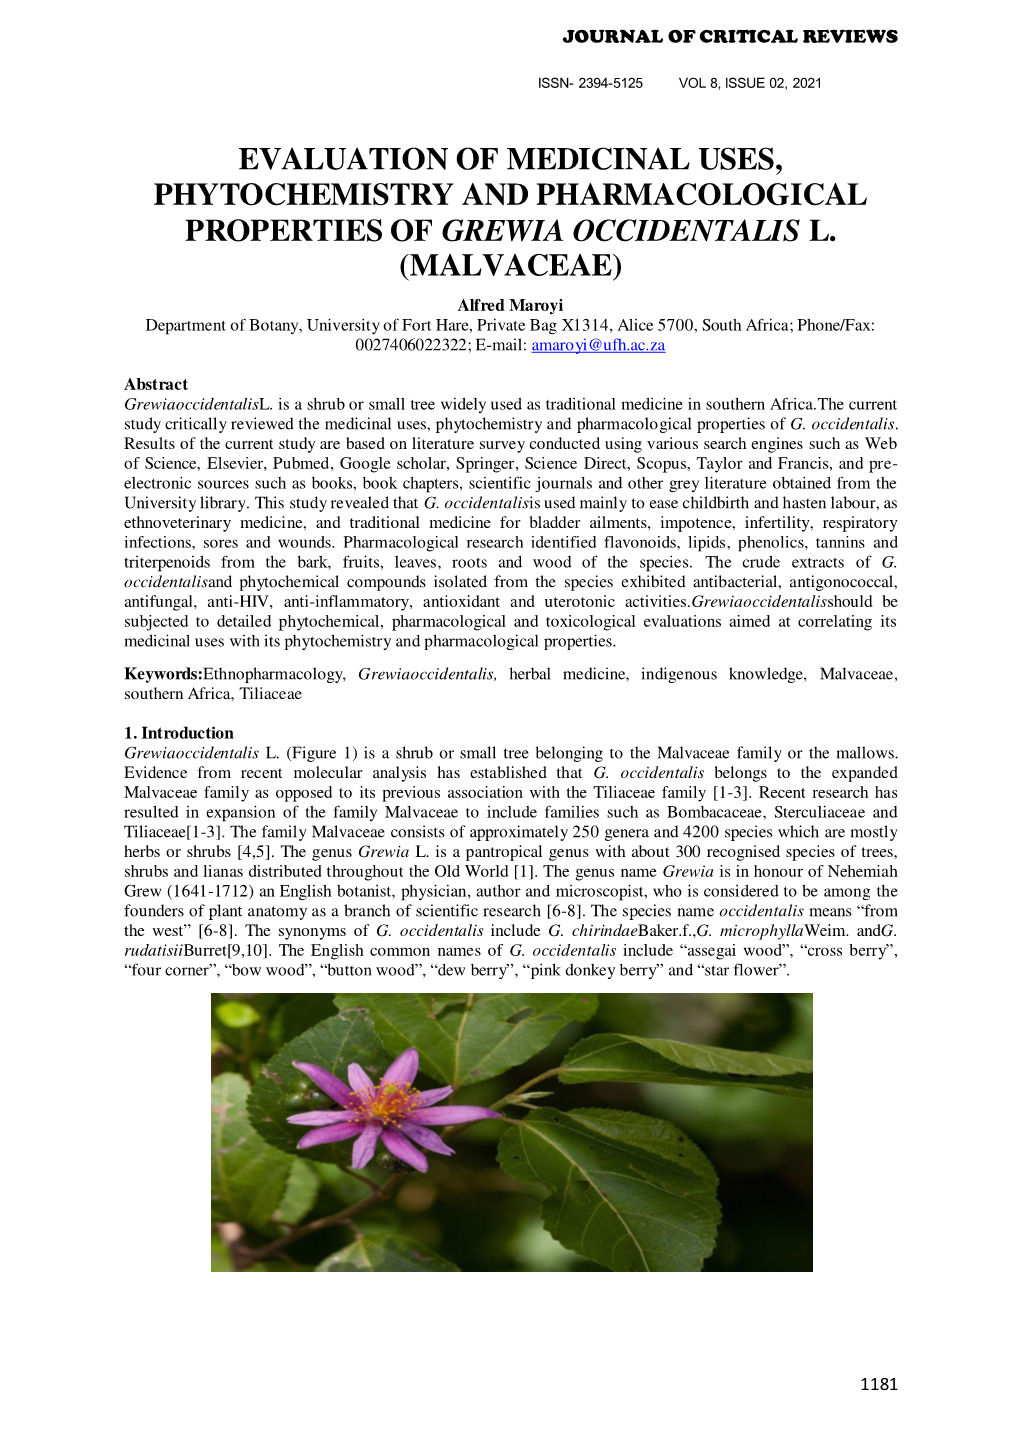 Evaluation of Medicinal Uses, Phytochemistry and Pharmacological Properties of Grewia Occidentalis L